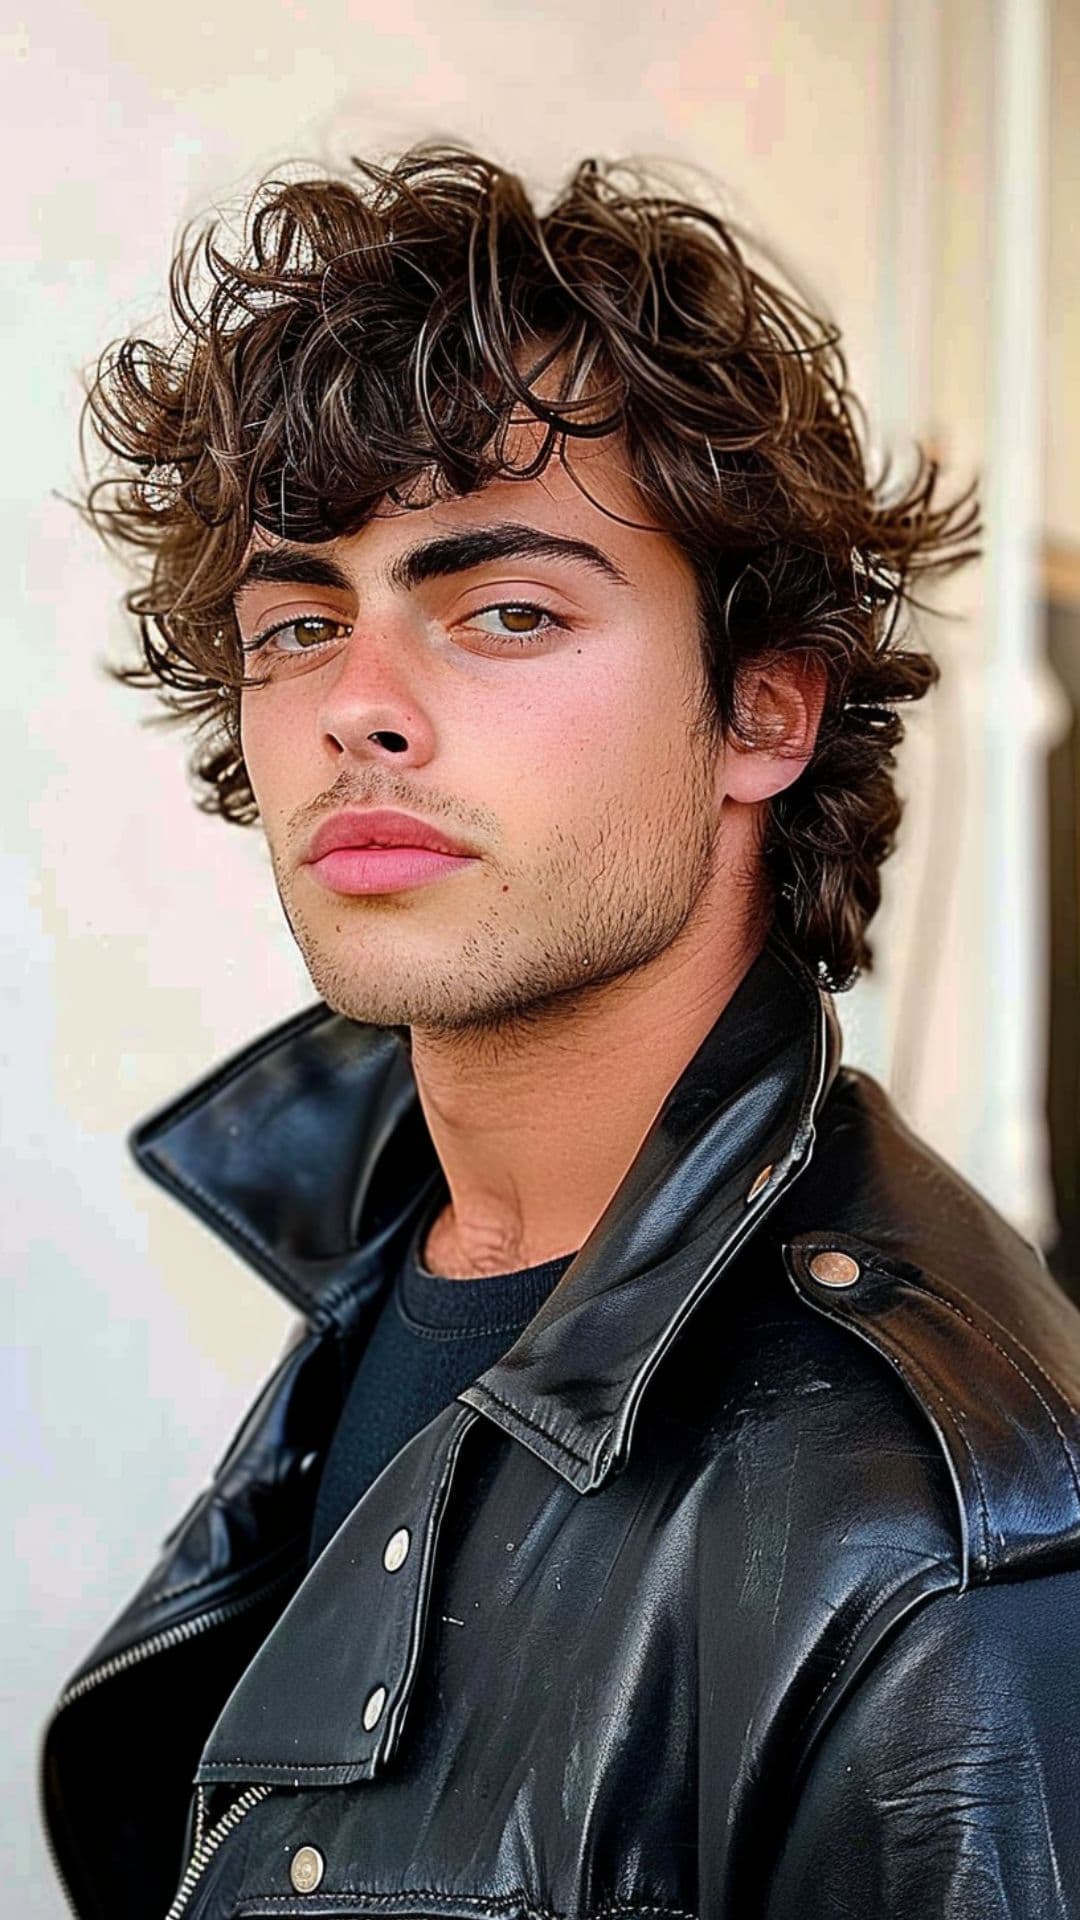 A man modelling a curly wolf cut hairstyle.